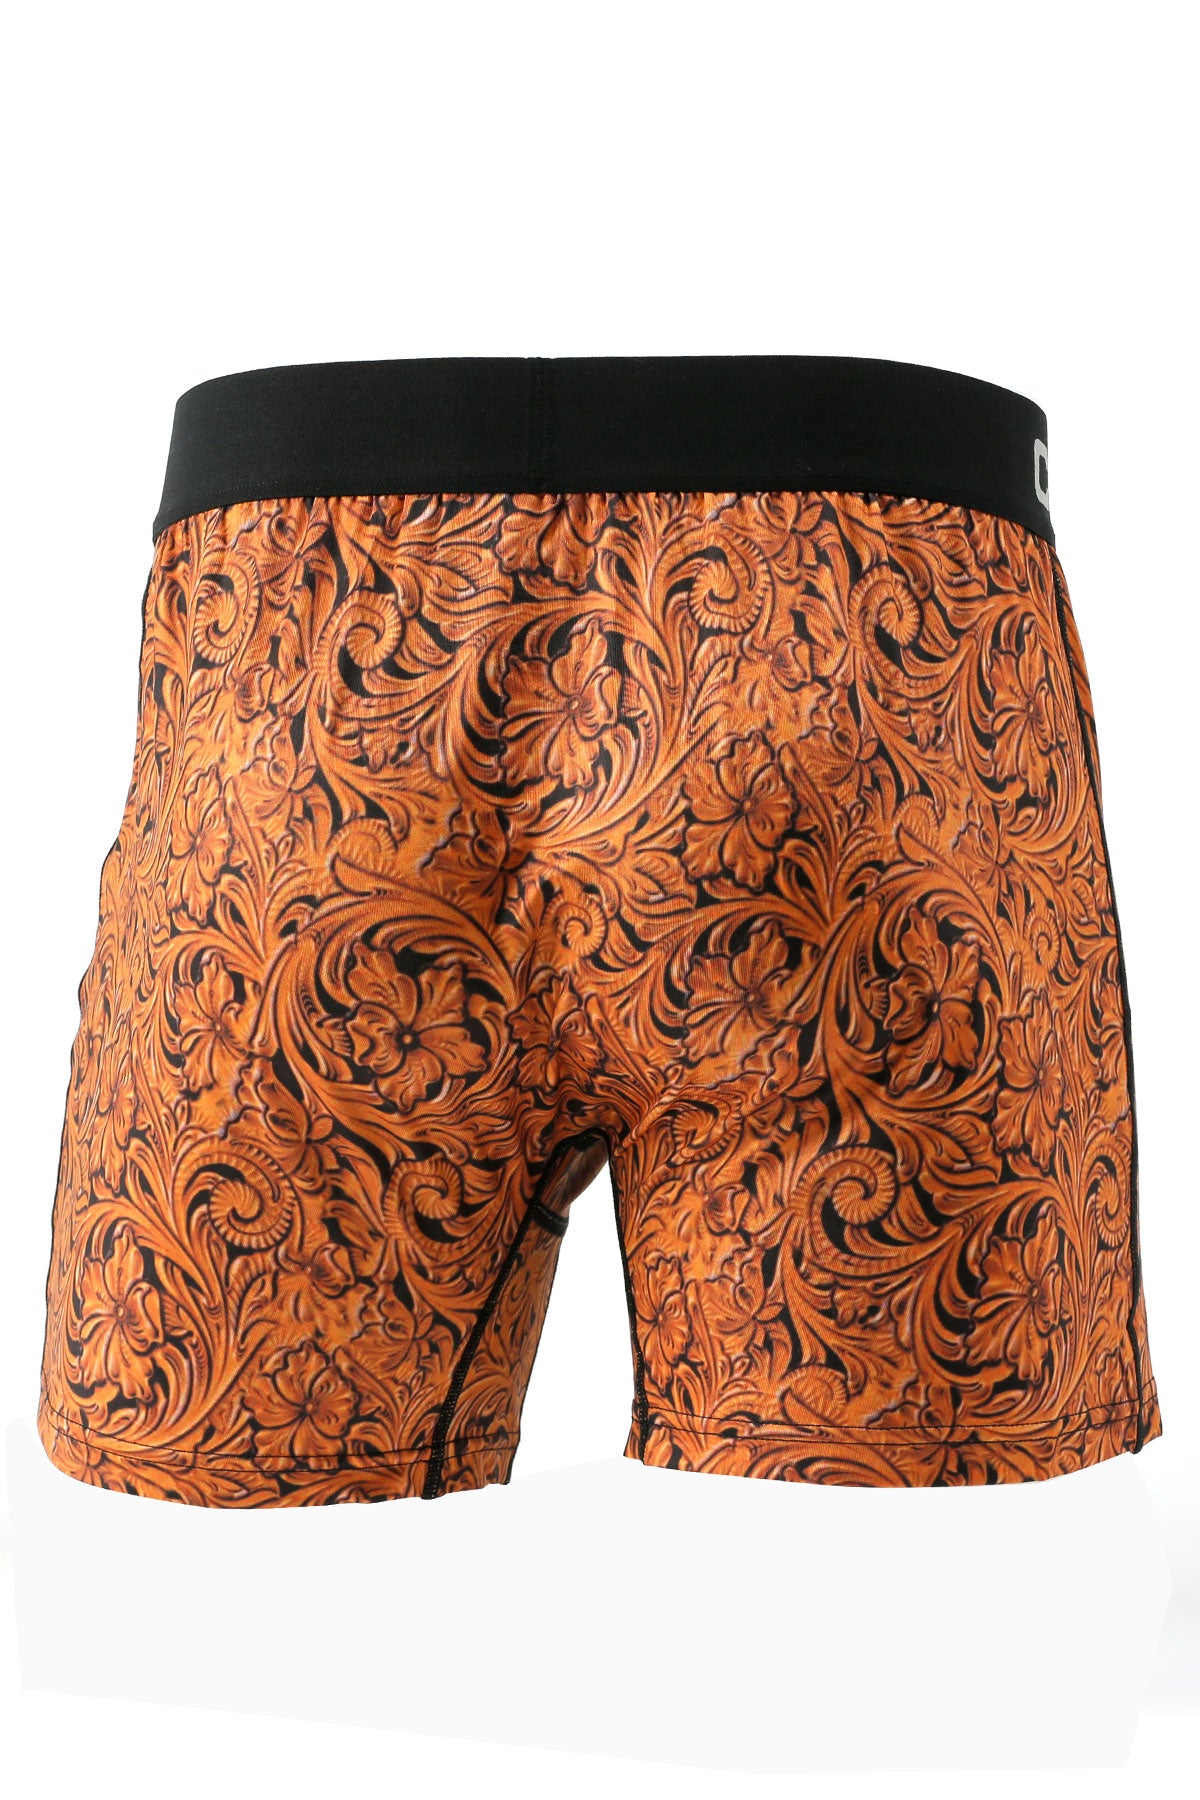 Cinch Men's Loose Fit Tooled Leather Look Boxer Briefs